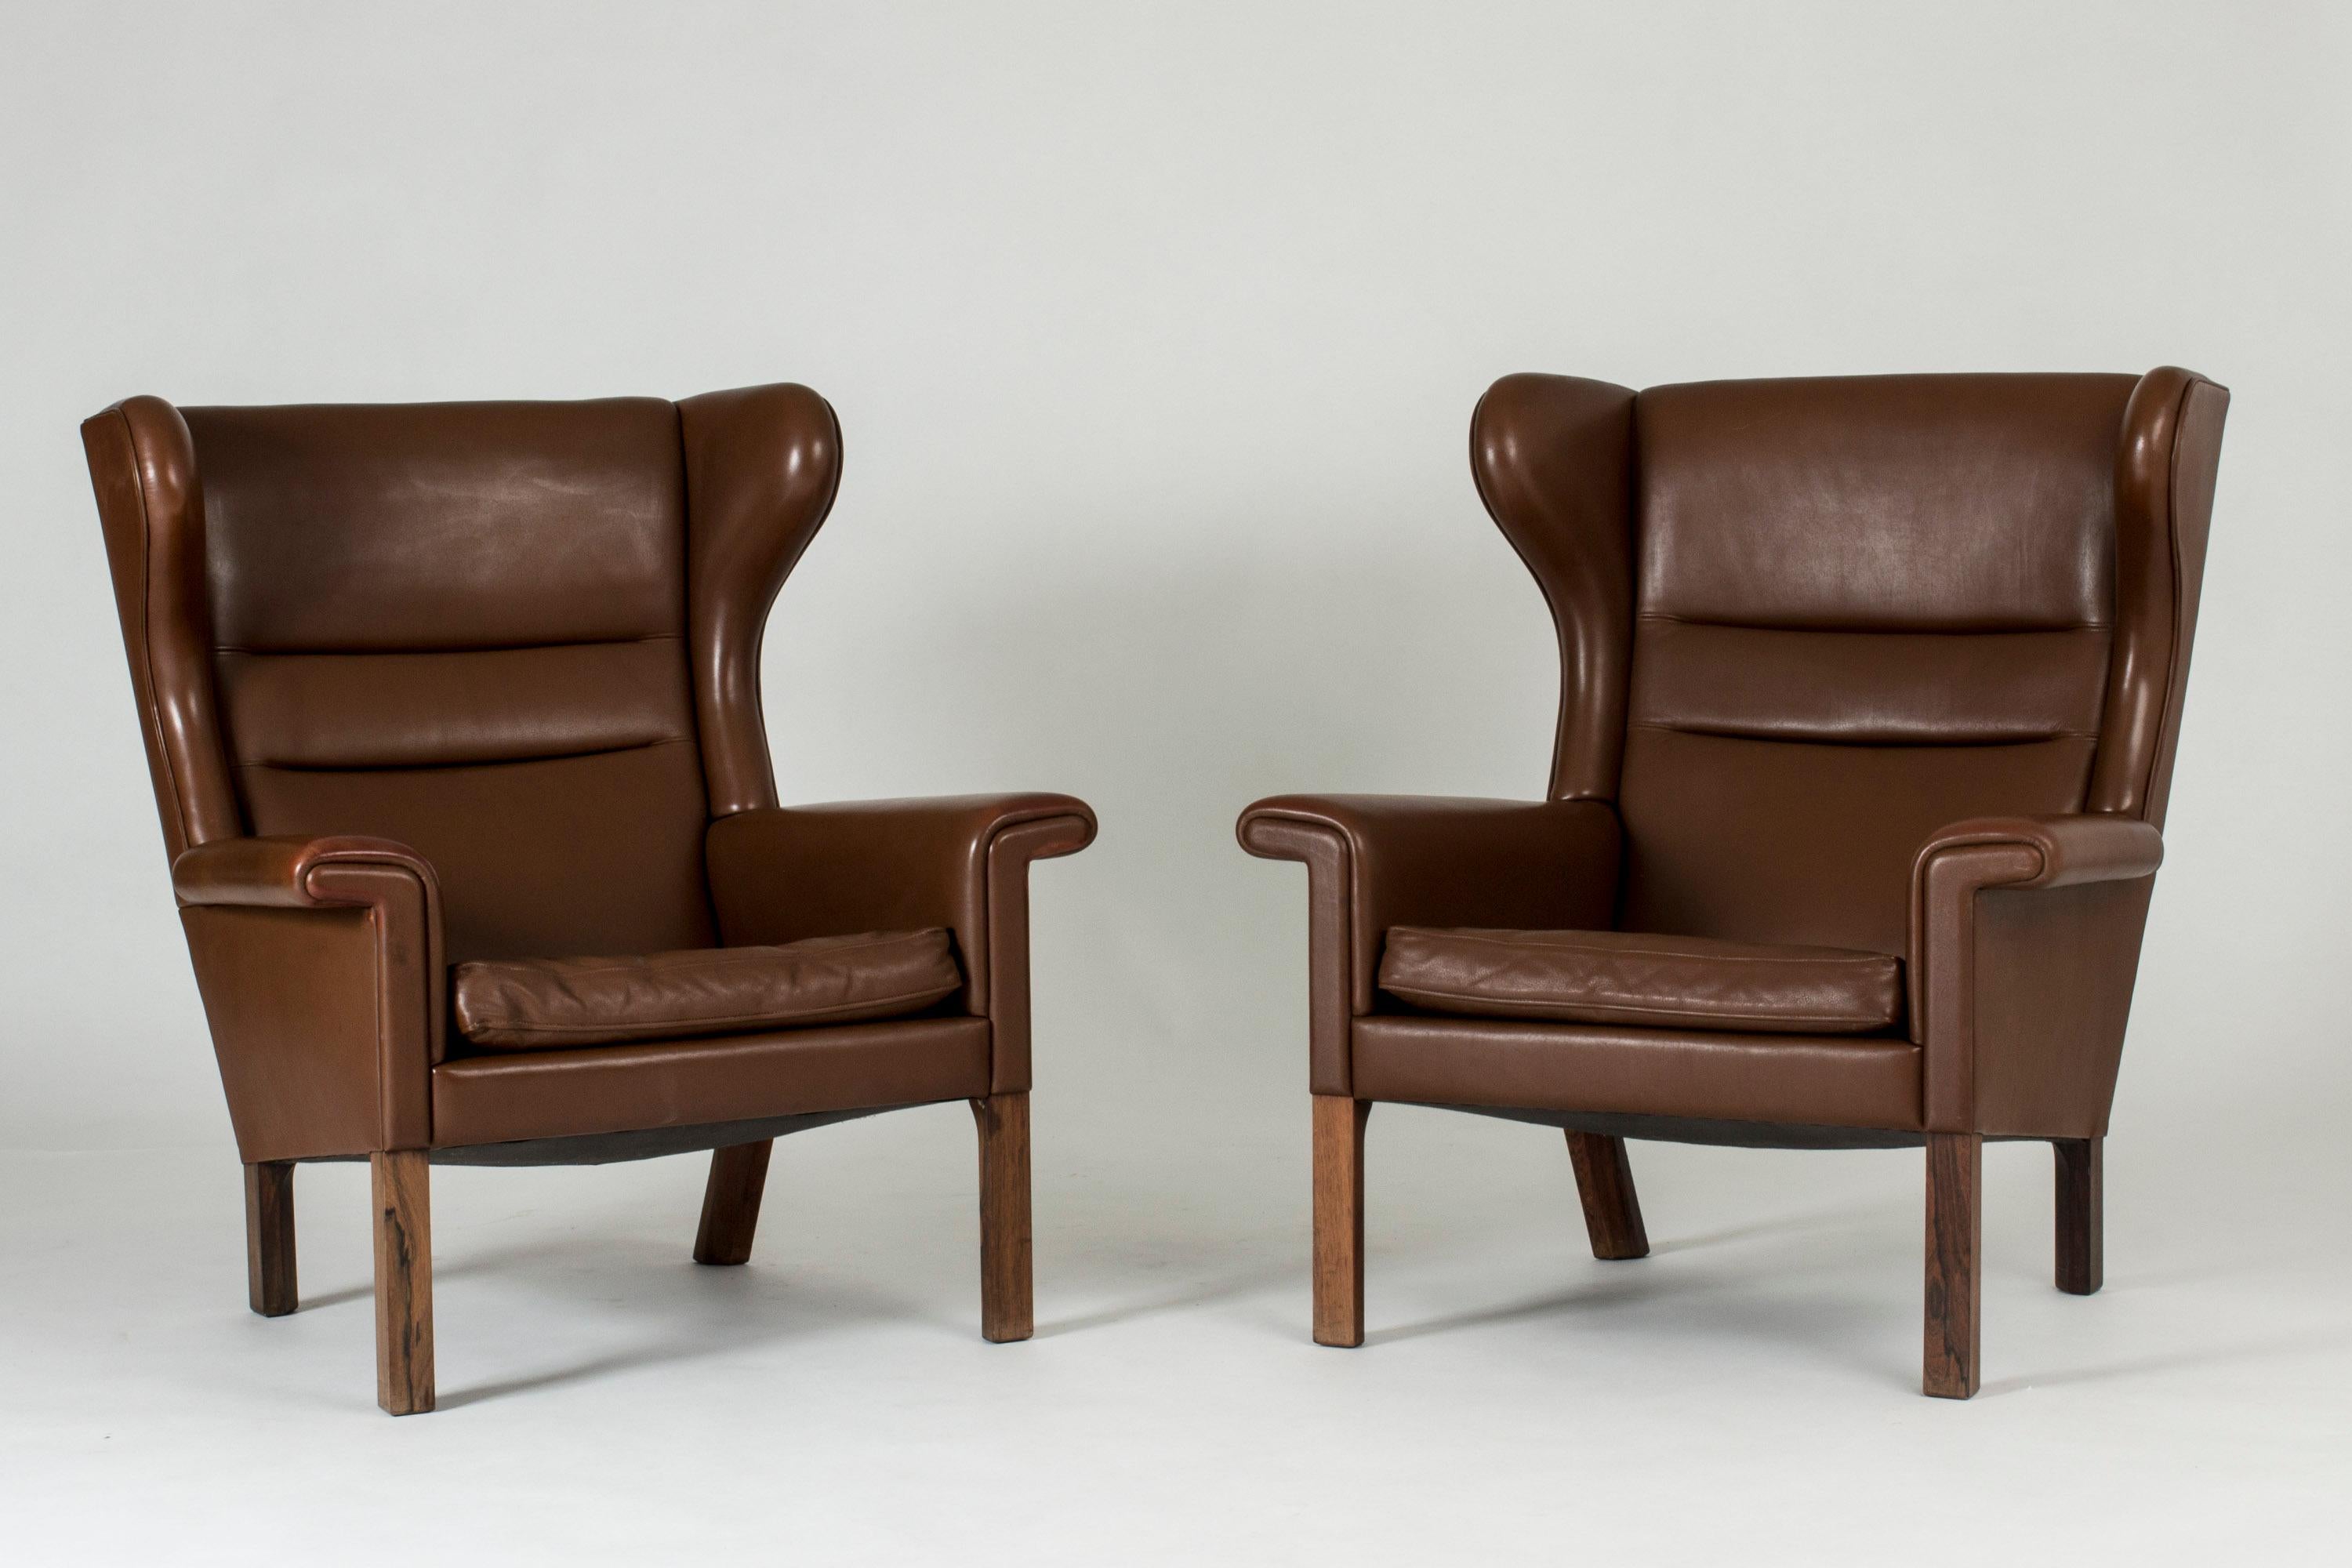 Pair of elegant wingback lounge chairs by Hans J. Wegner, made with dark brown leather and rosewood legs. Pair of ottomans made from rosewood with loose leather cushions. The original tags, including the name of the consignee “Arkitekt Sv. Aa.